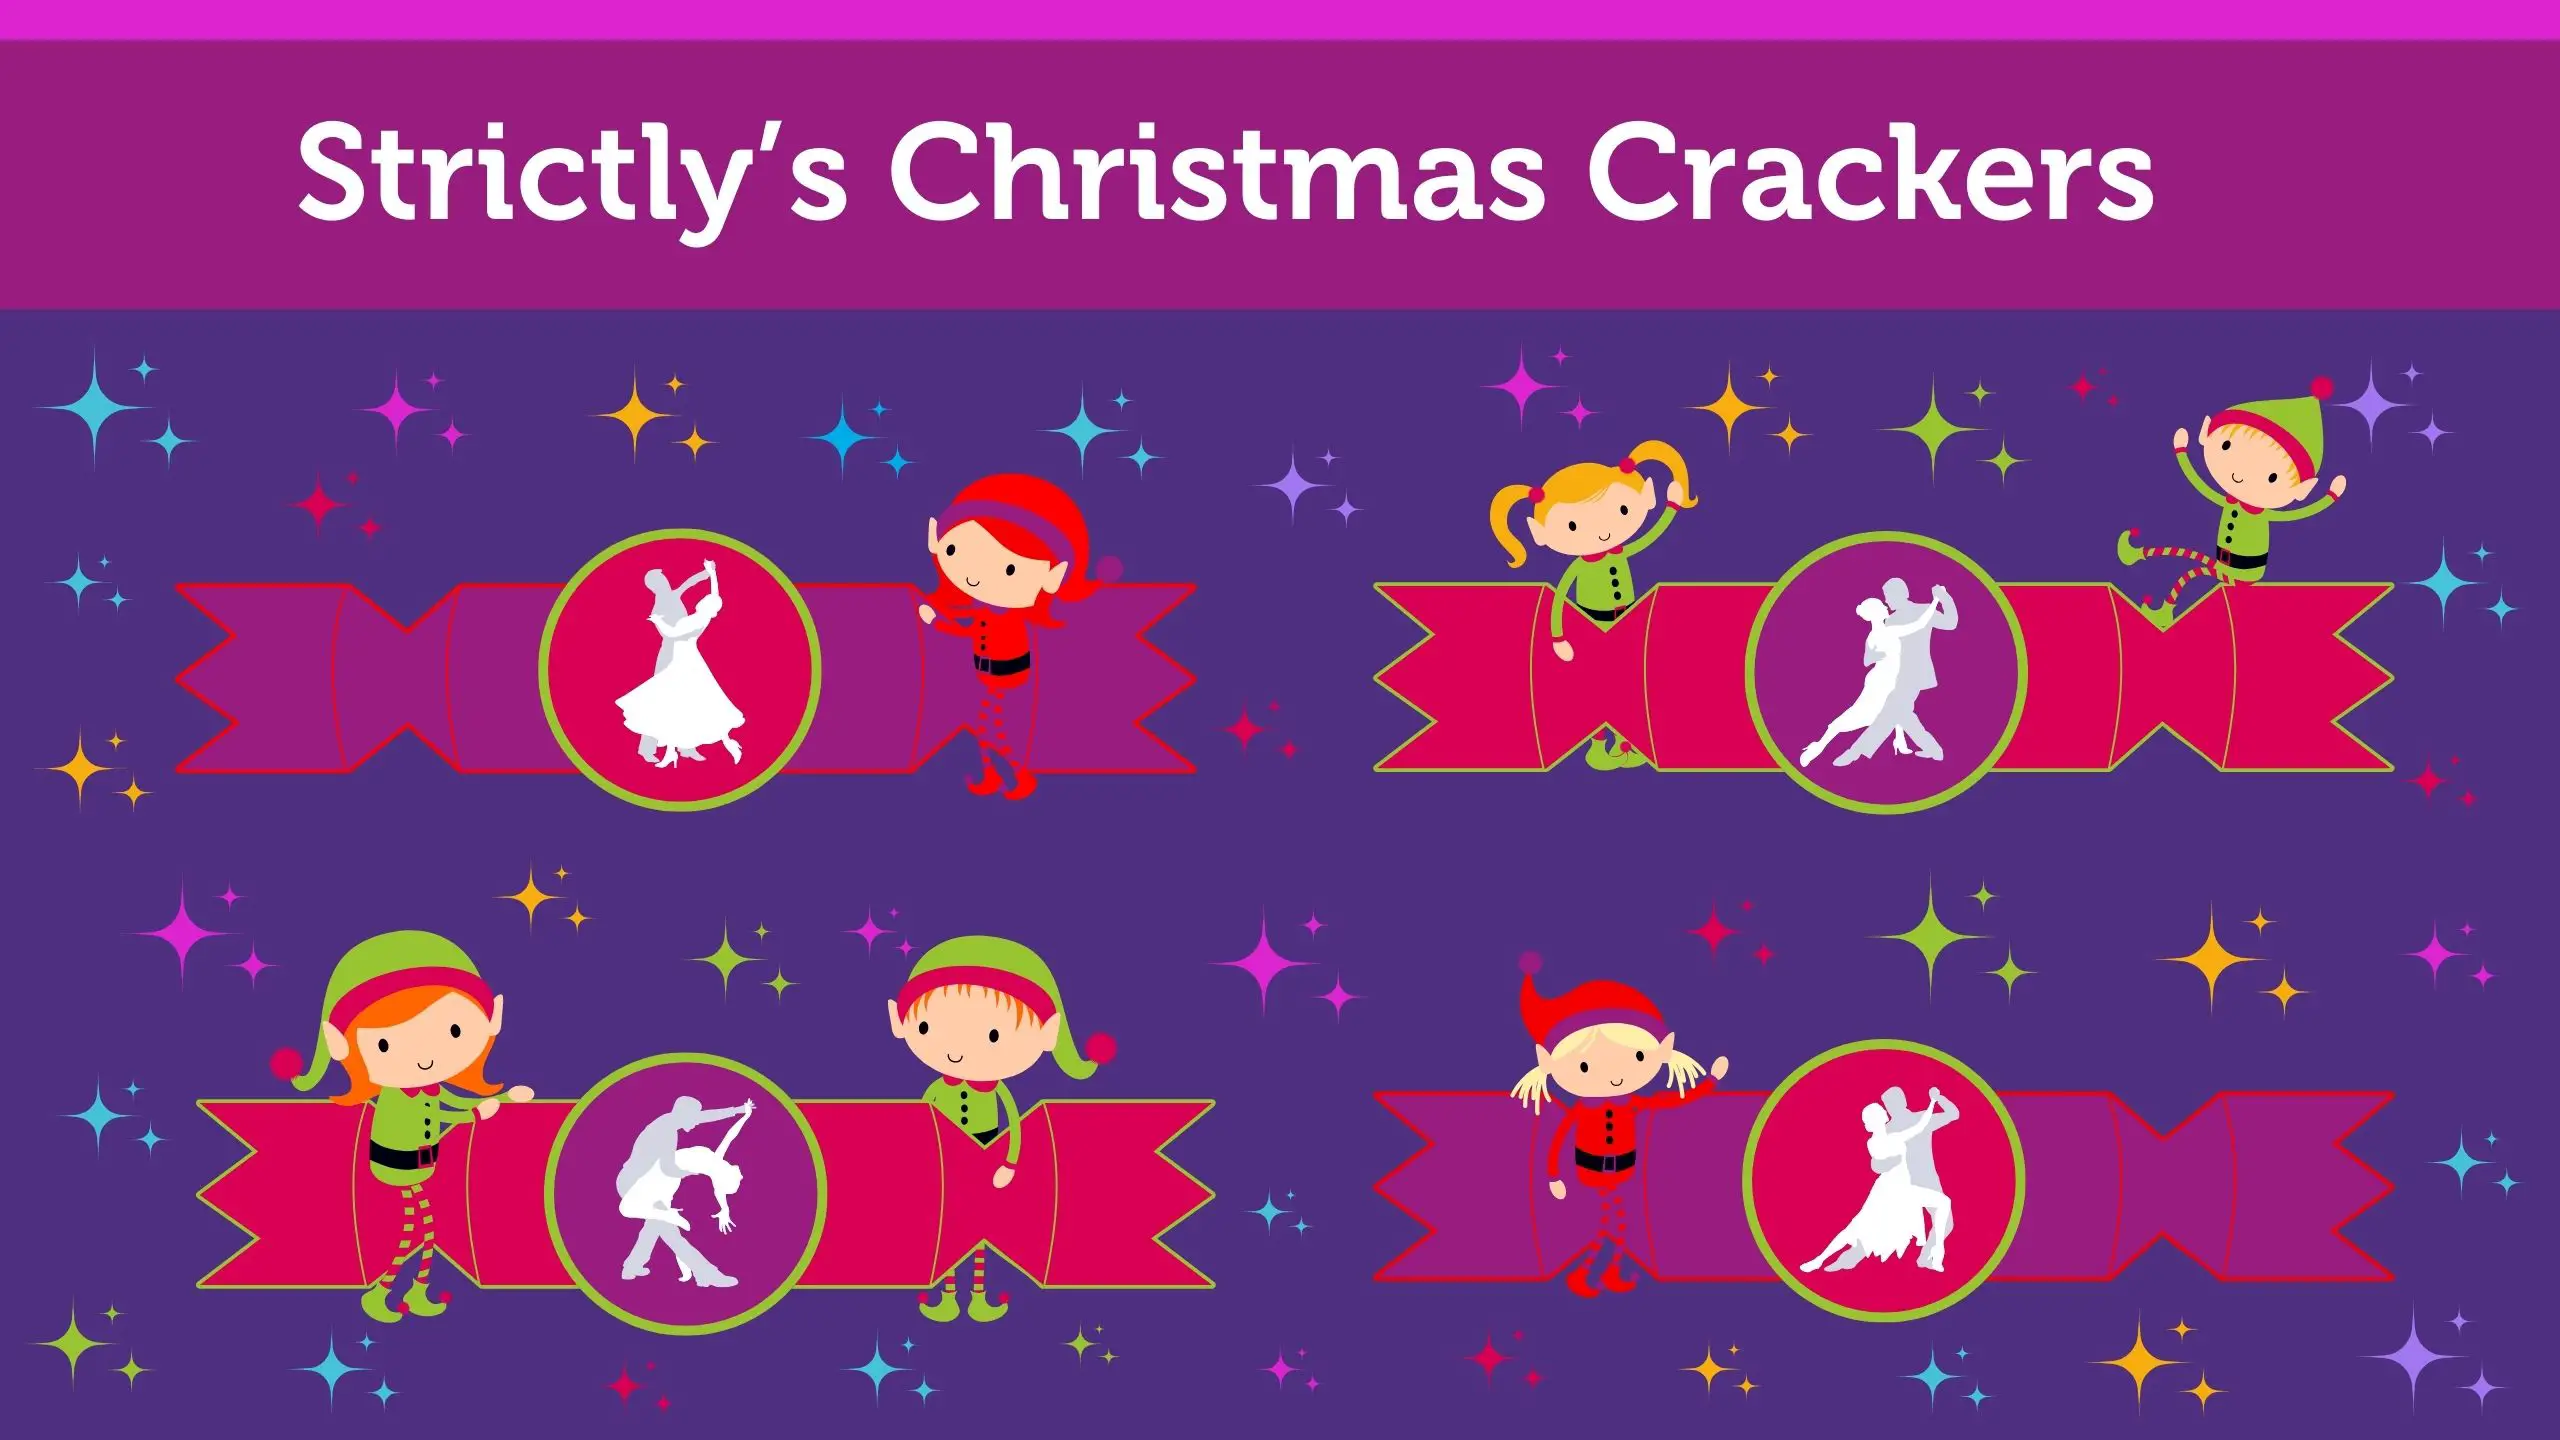 Strictly's Christmas Crackers